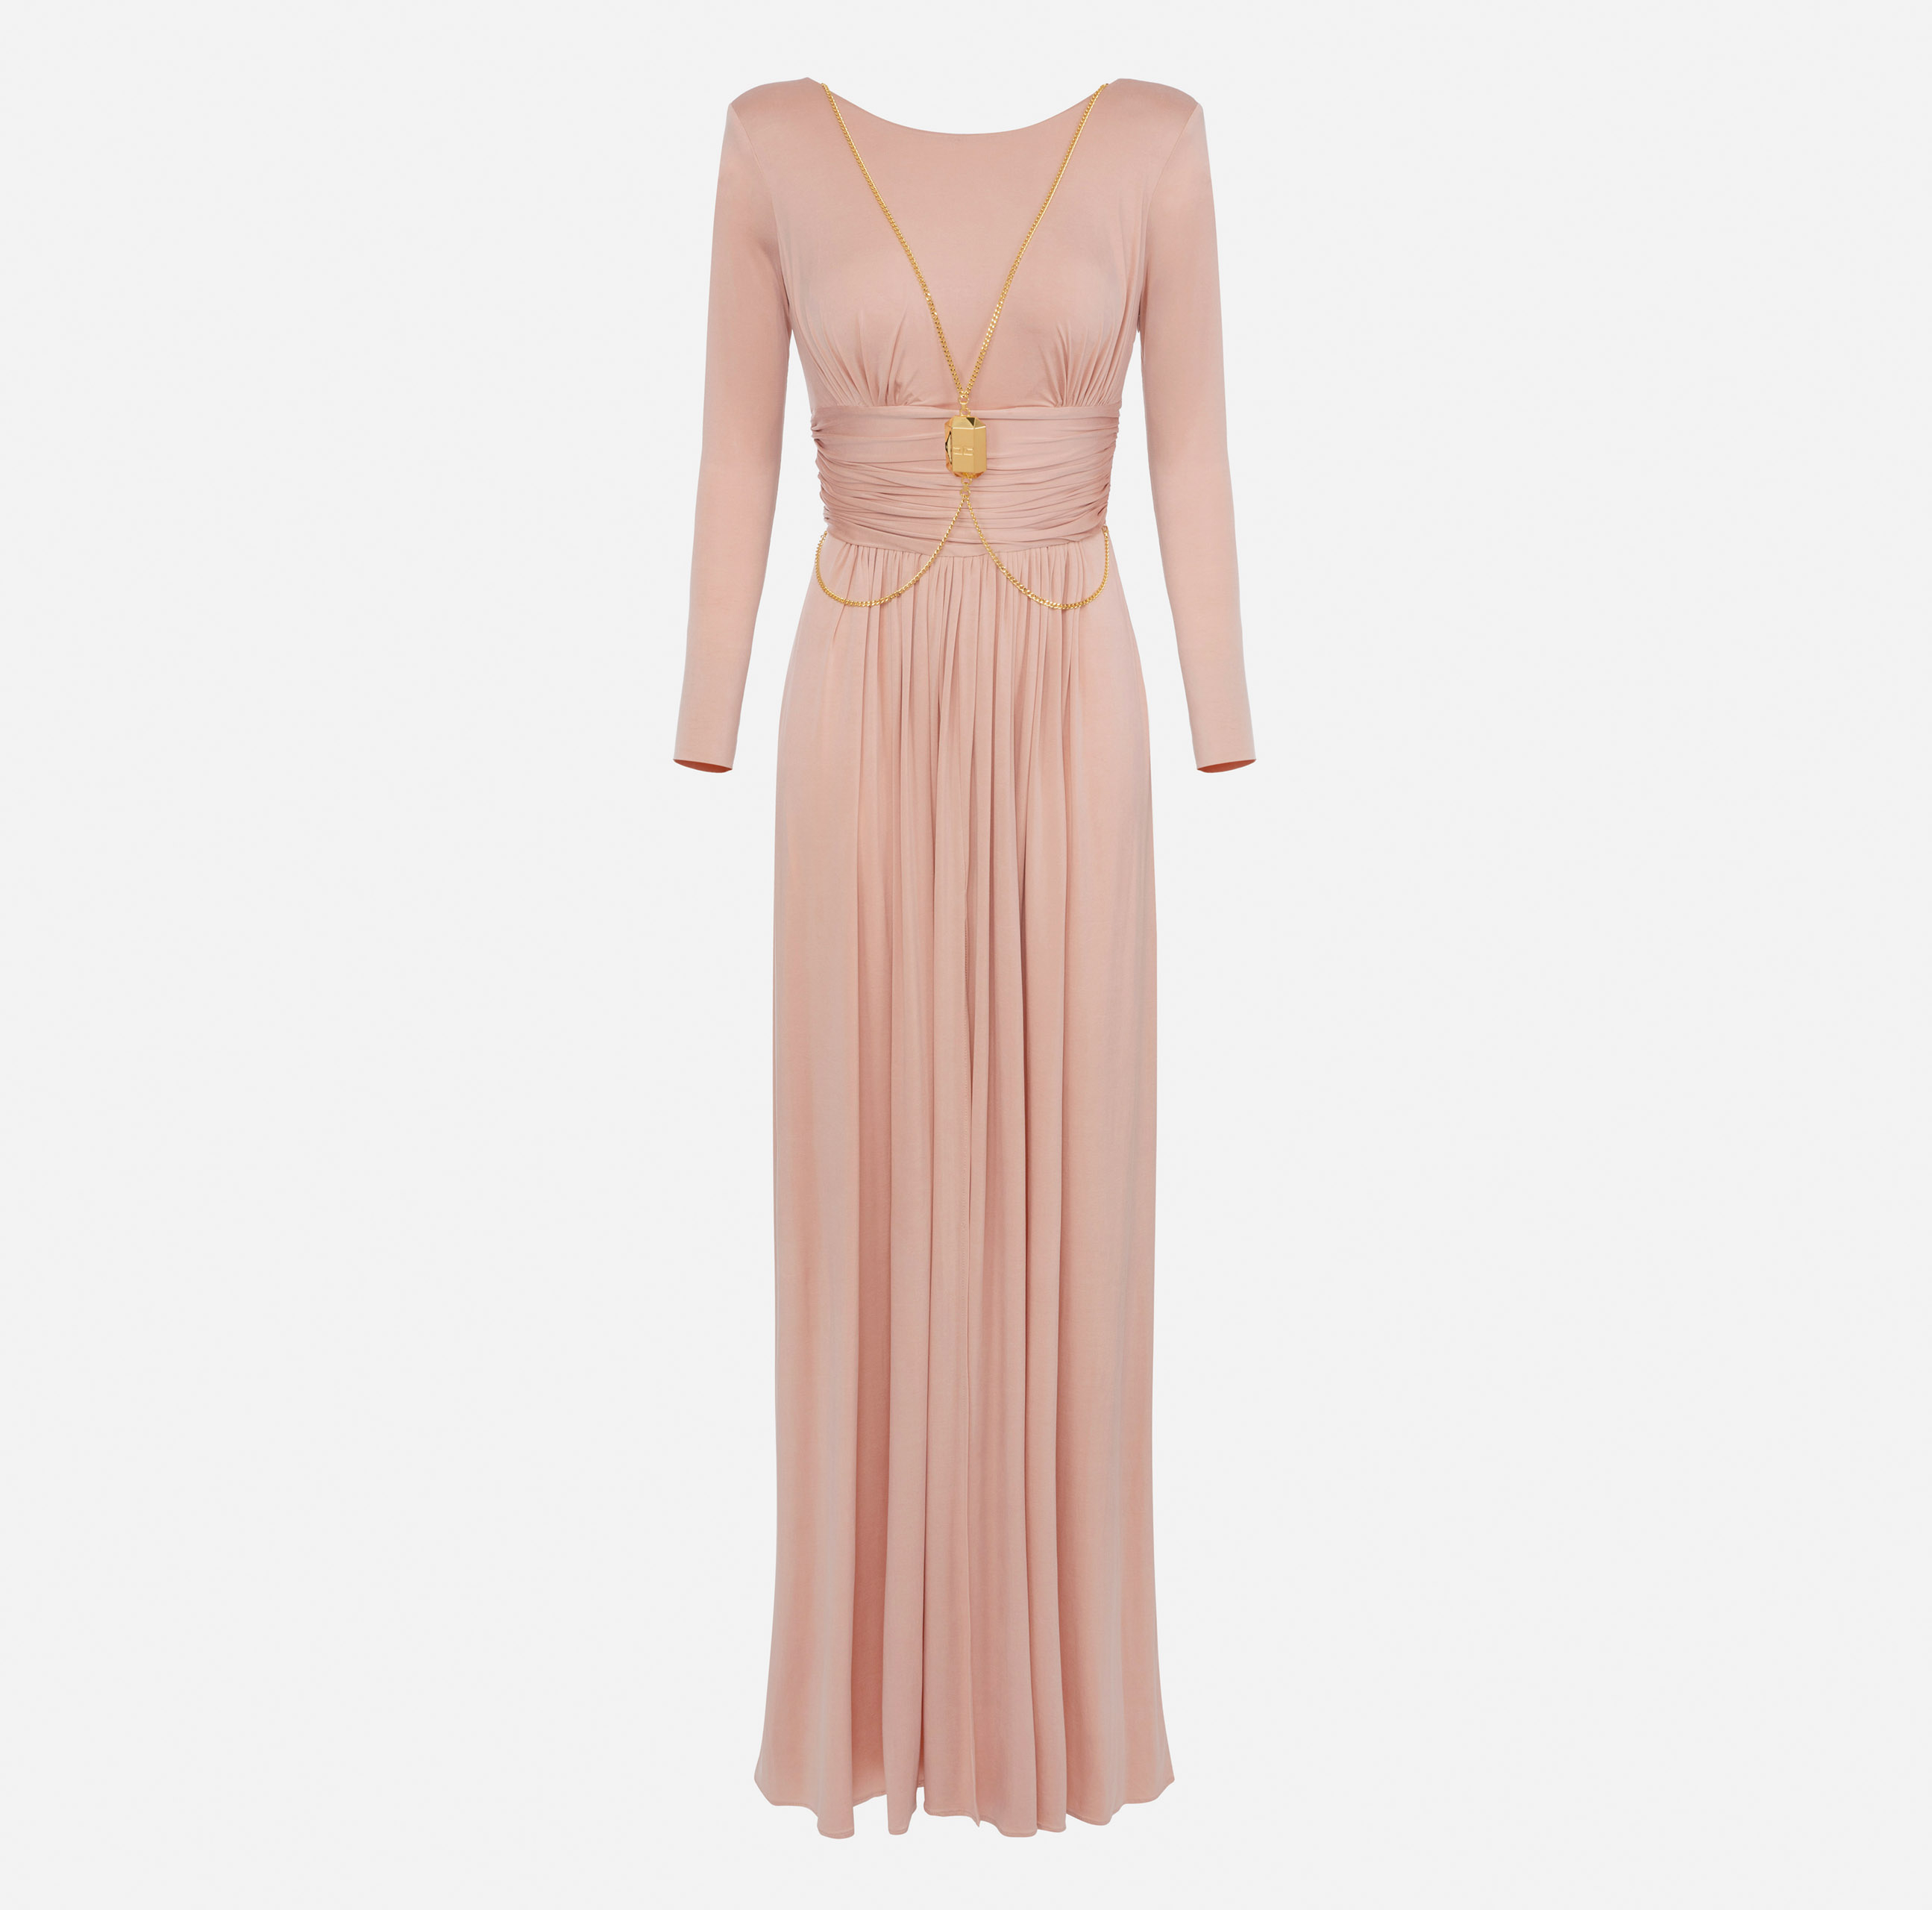 Red Carpet dress in jersey with accessory - Elisabetta Franchi